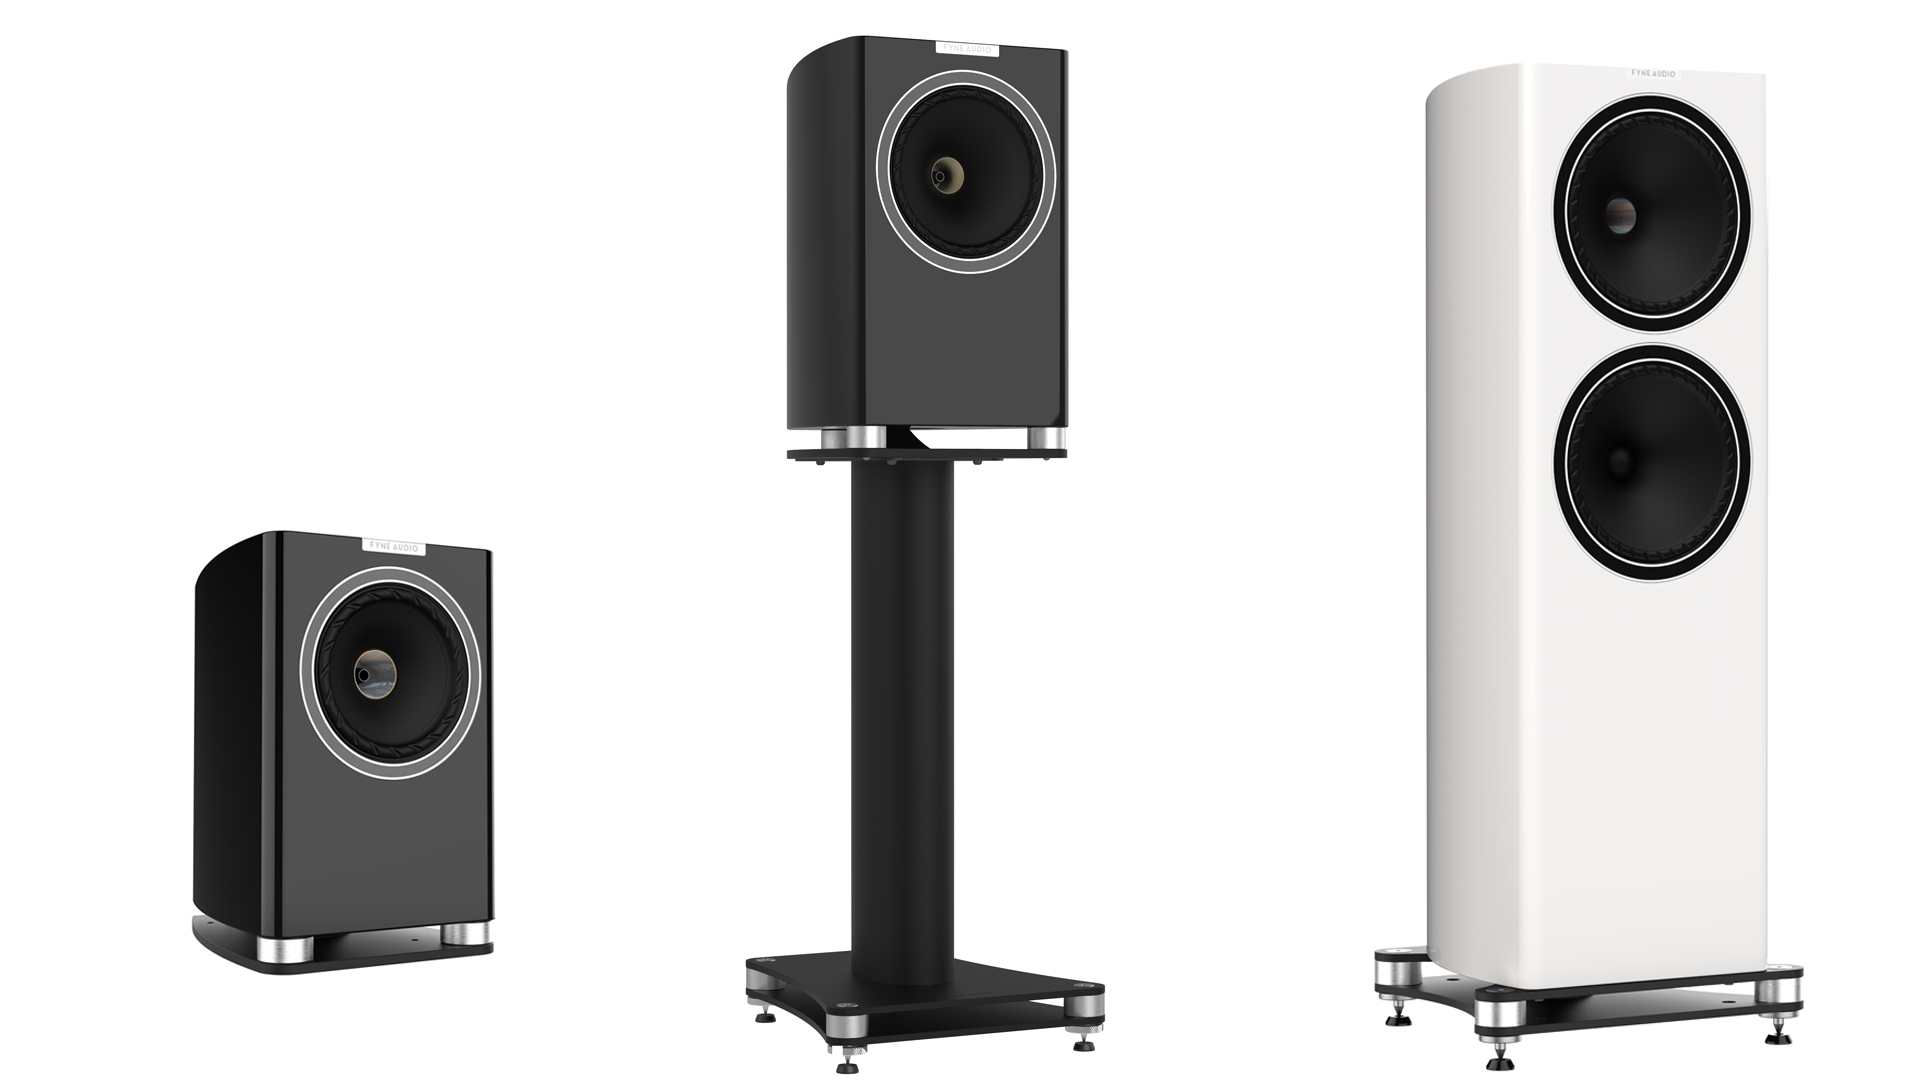 F700, F701, F704 (from left, Images: Fyne Audio)